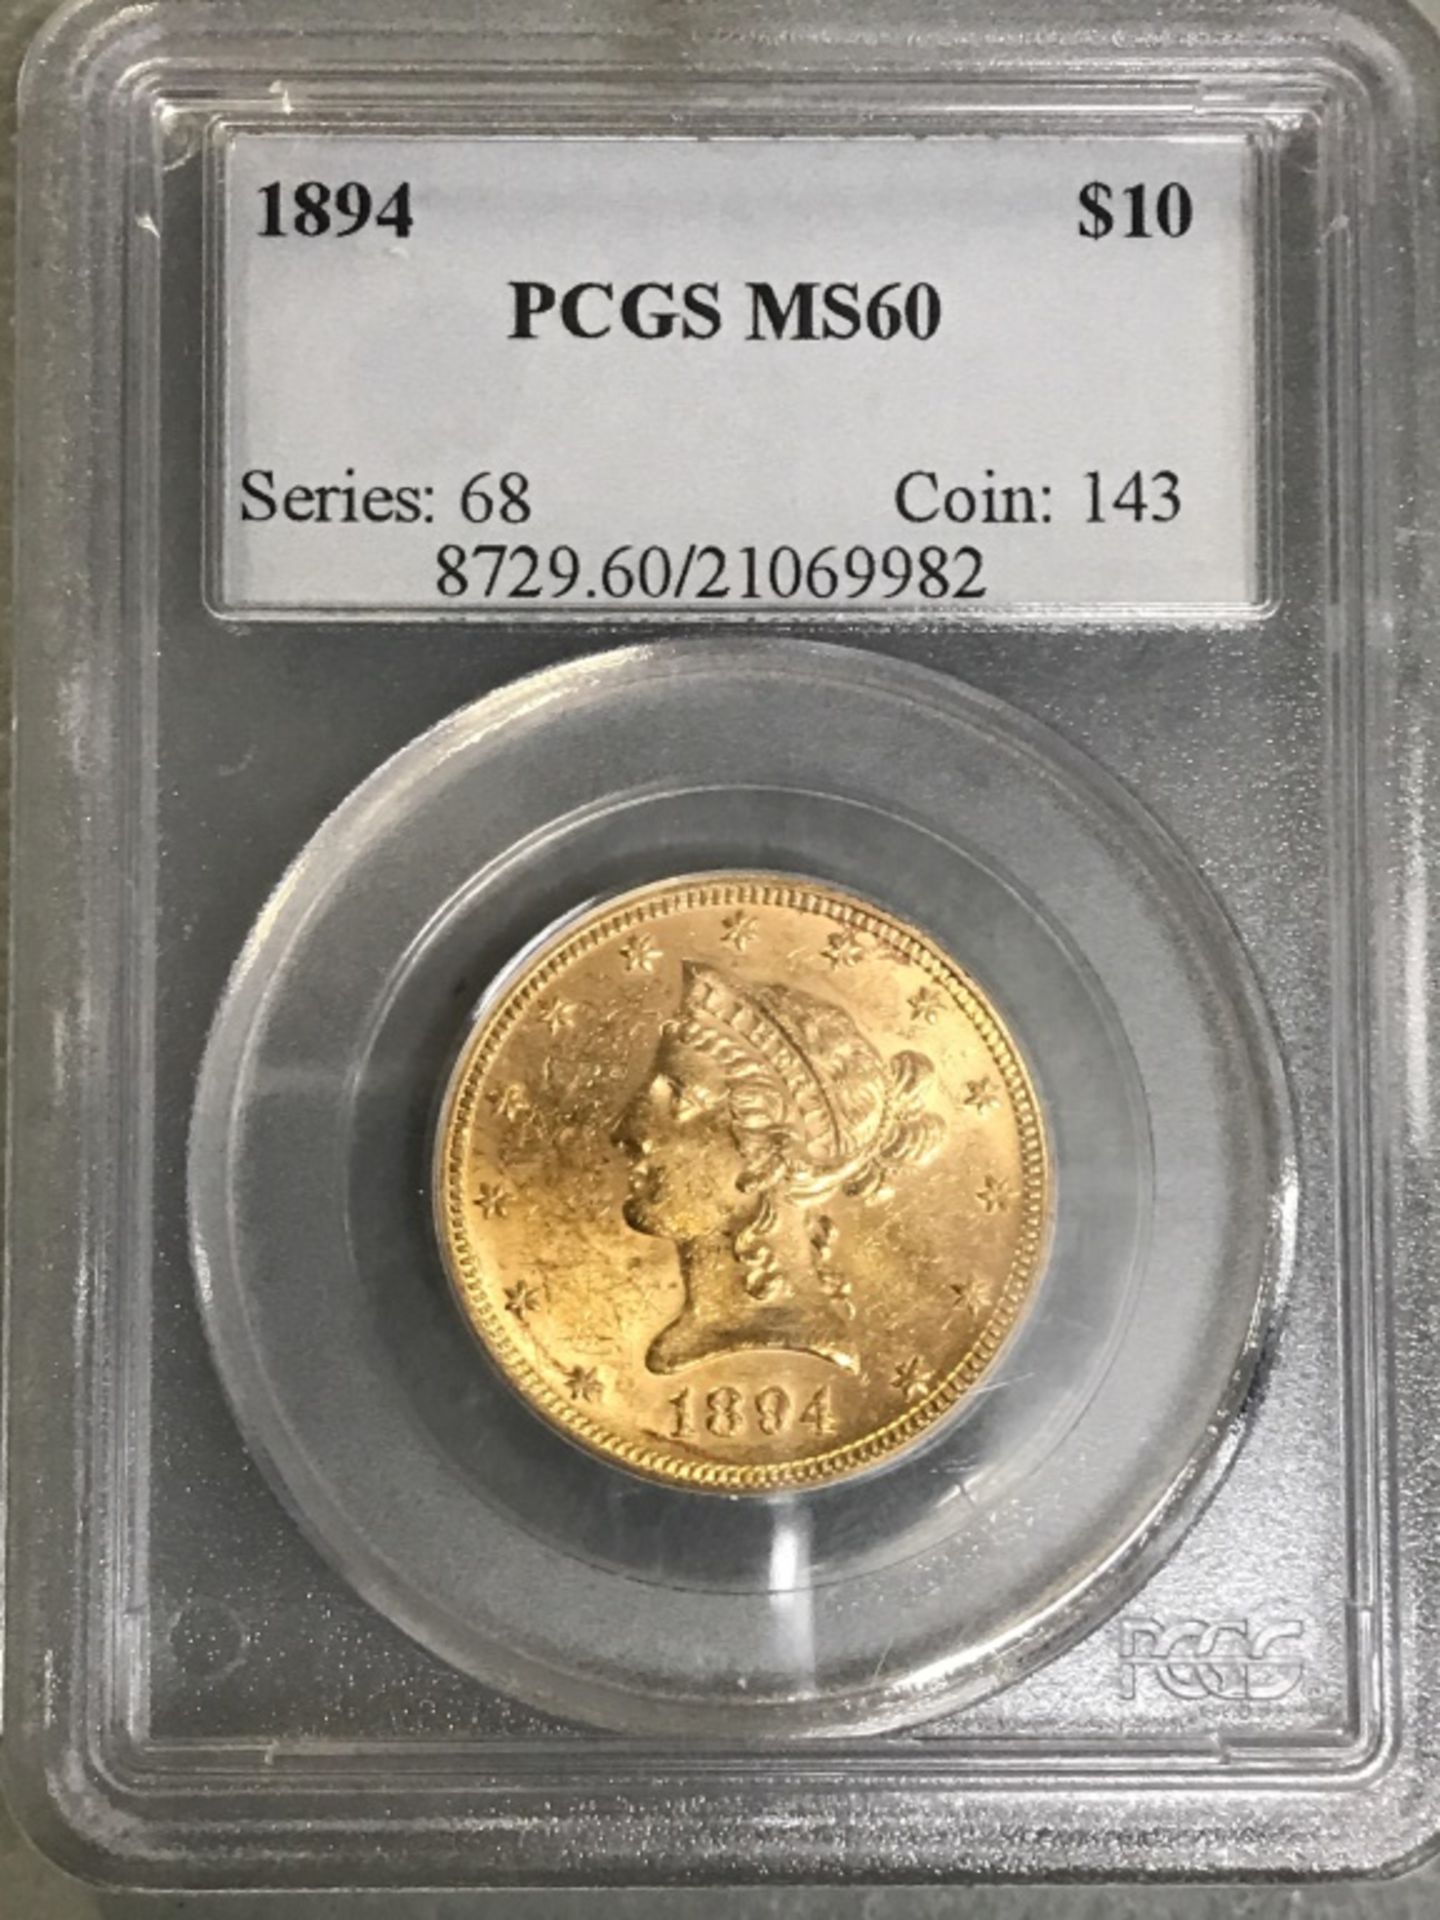 $10 US Gold MS 60 1894